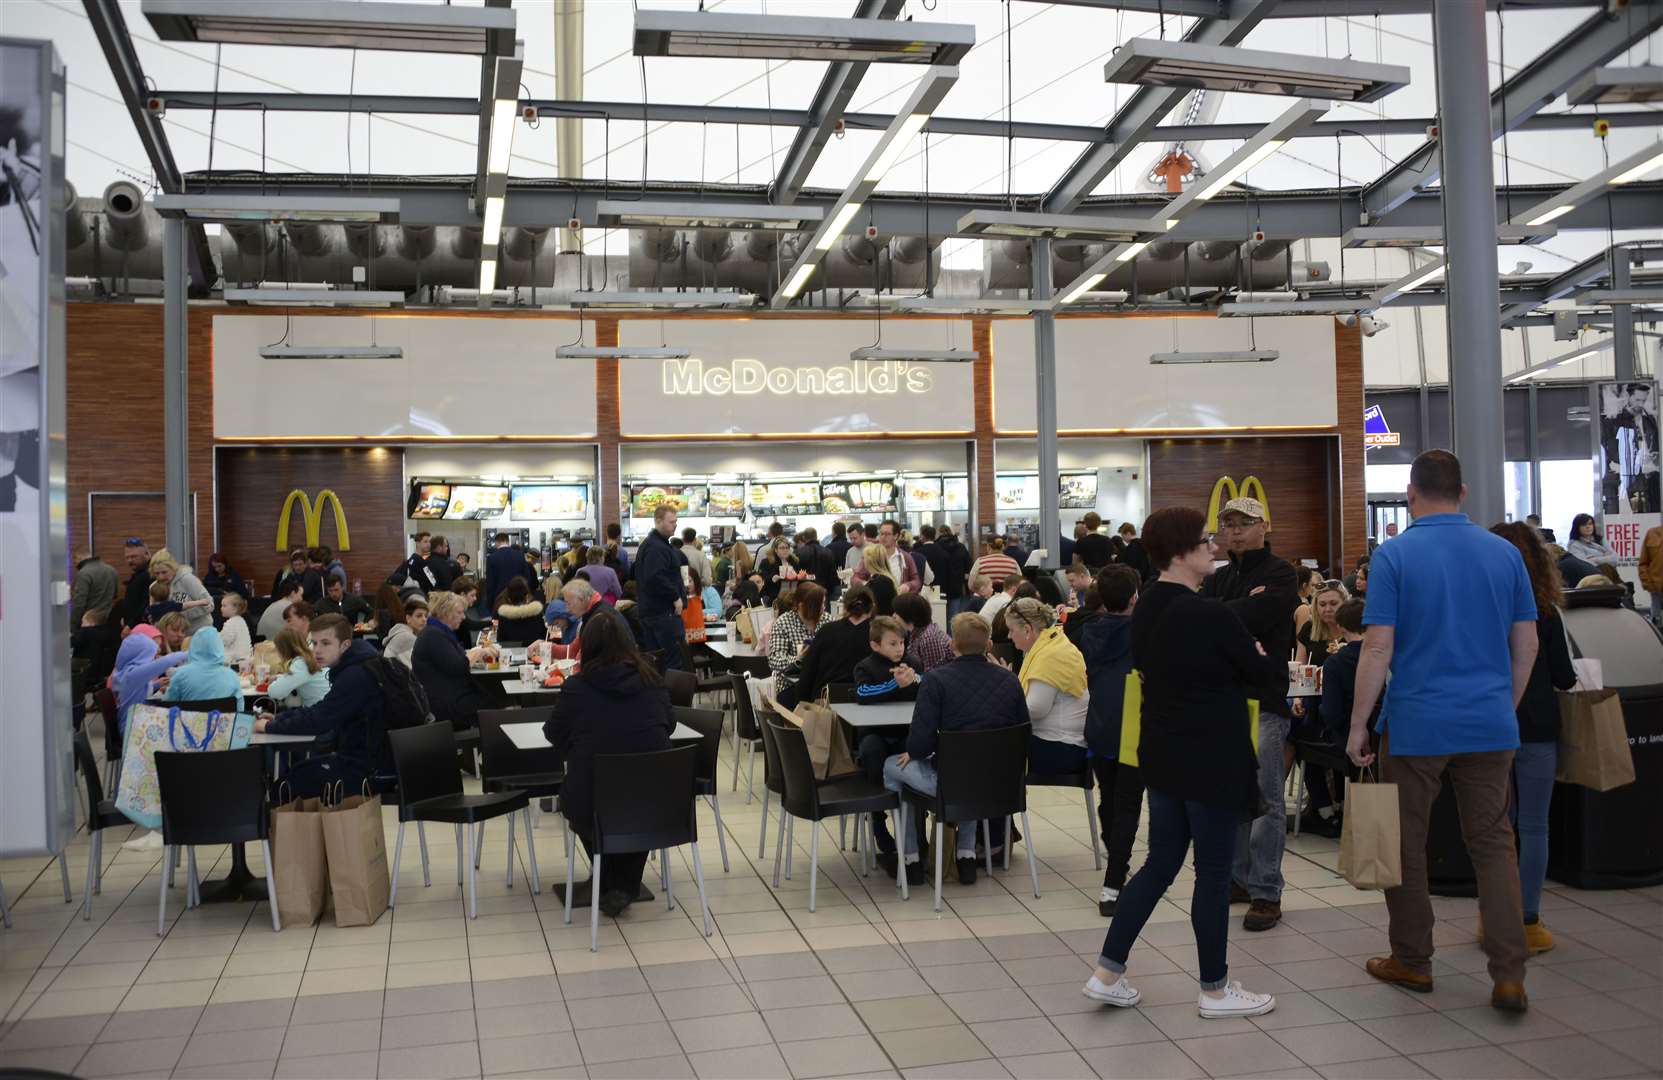 McDonald's was expected to rejoin the Outlet when the £90m extension opened, but pulled out in 2018